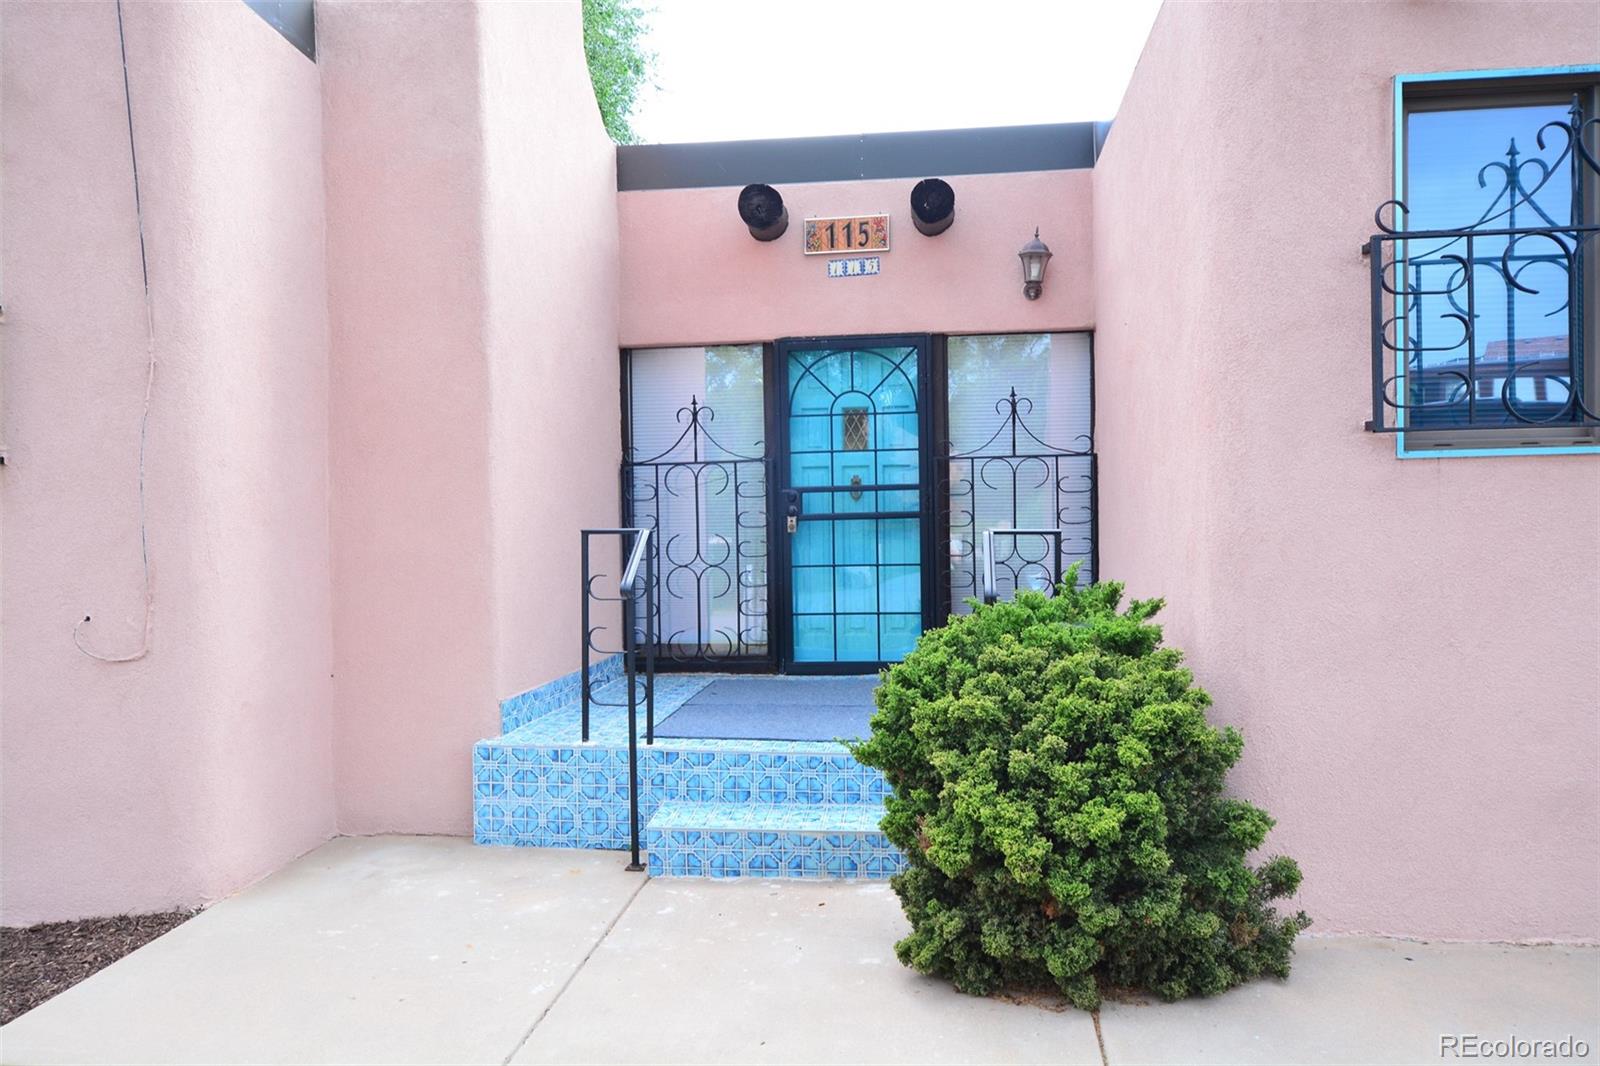 115  via vallecito , manitou springs sold home. Closed on 2024-01-23 for $540,000.